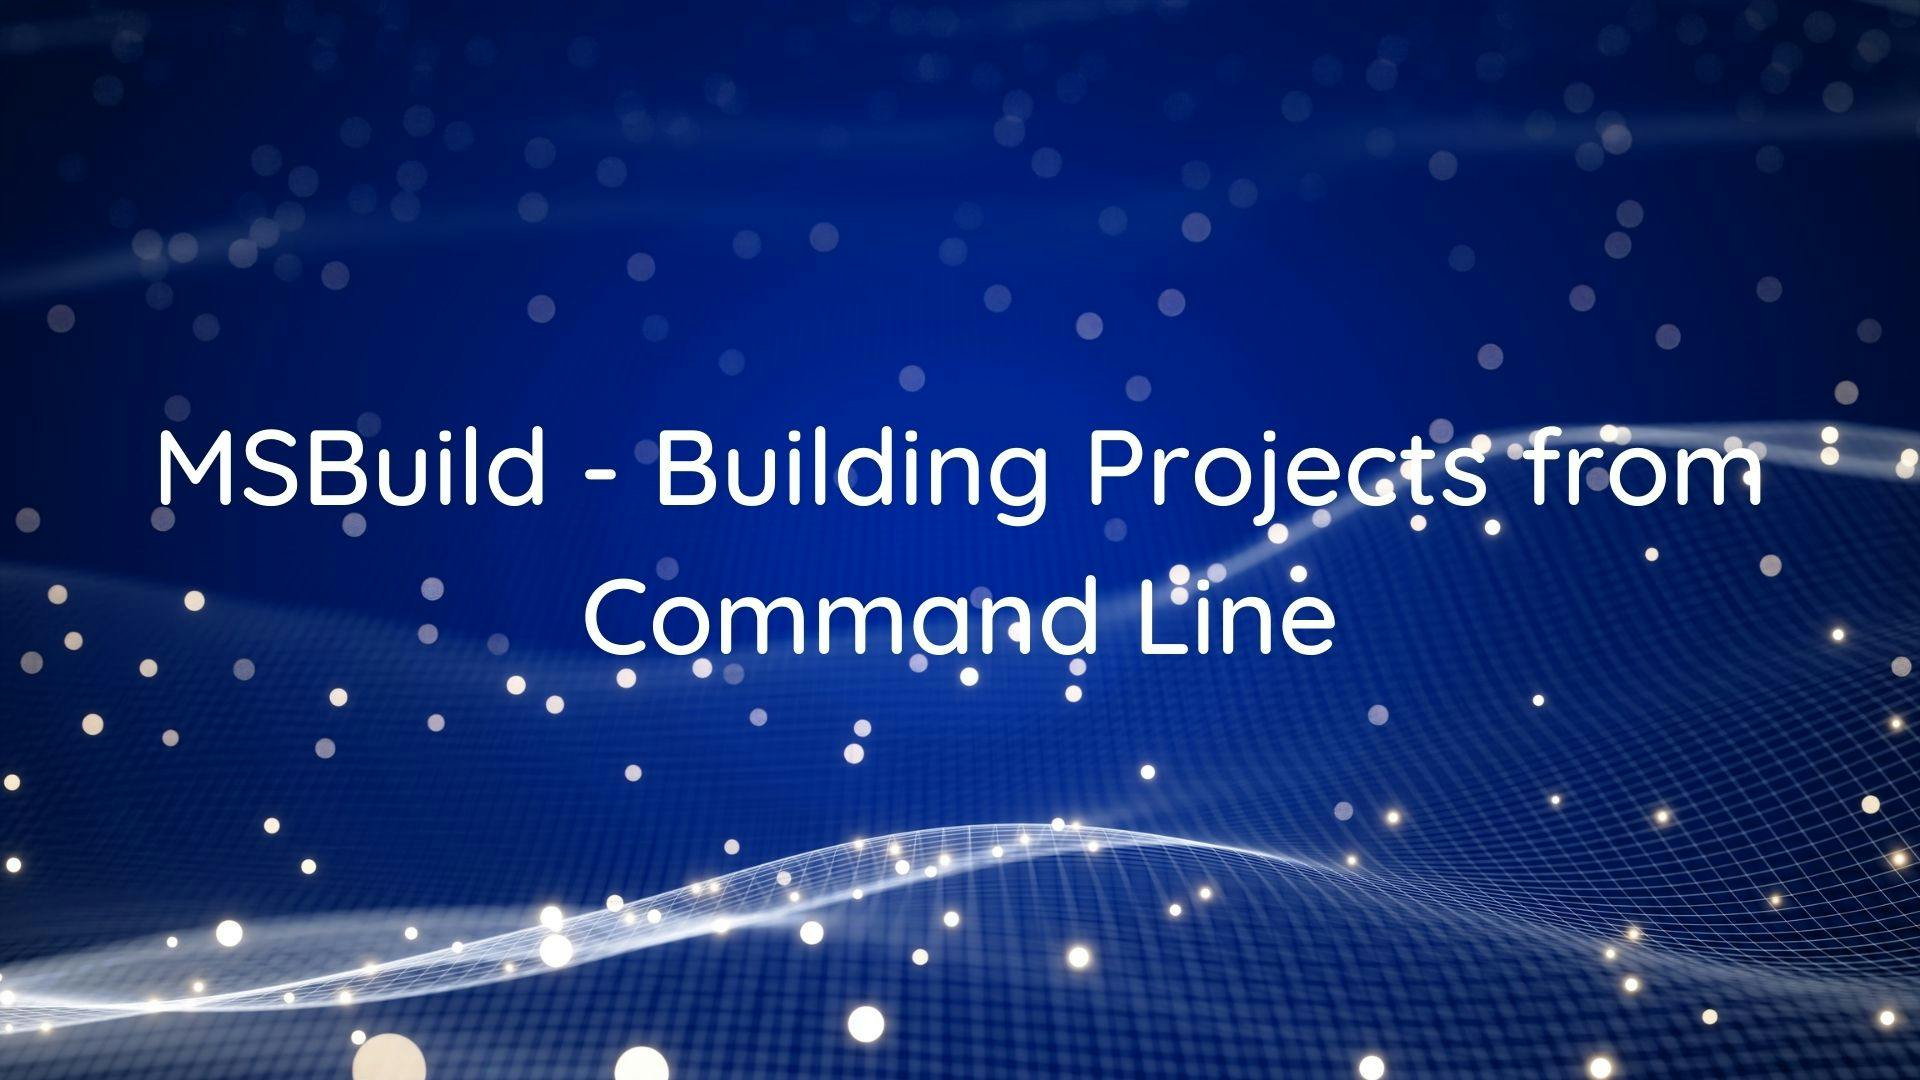 MSBuild - Building projects and solutions from command line